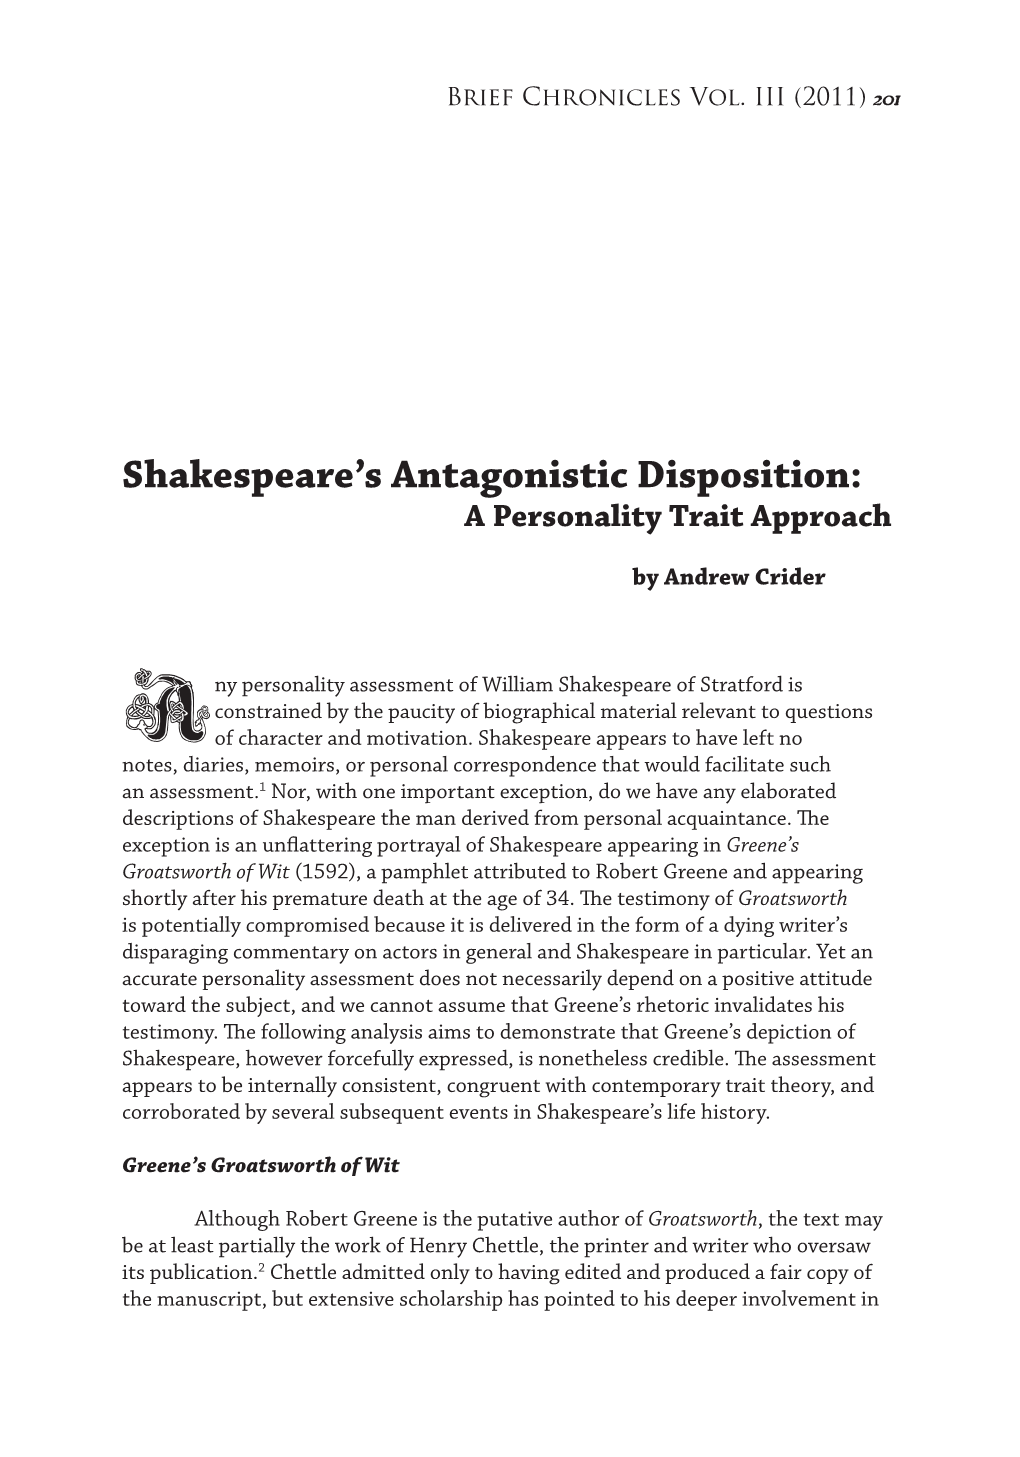 Shakespeare's Antagonistic Disposition